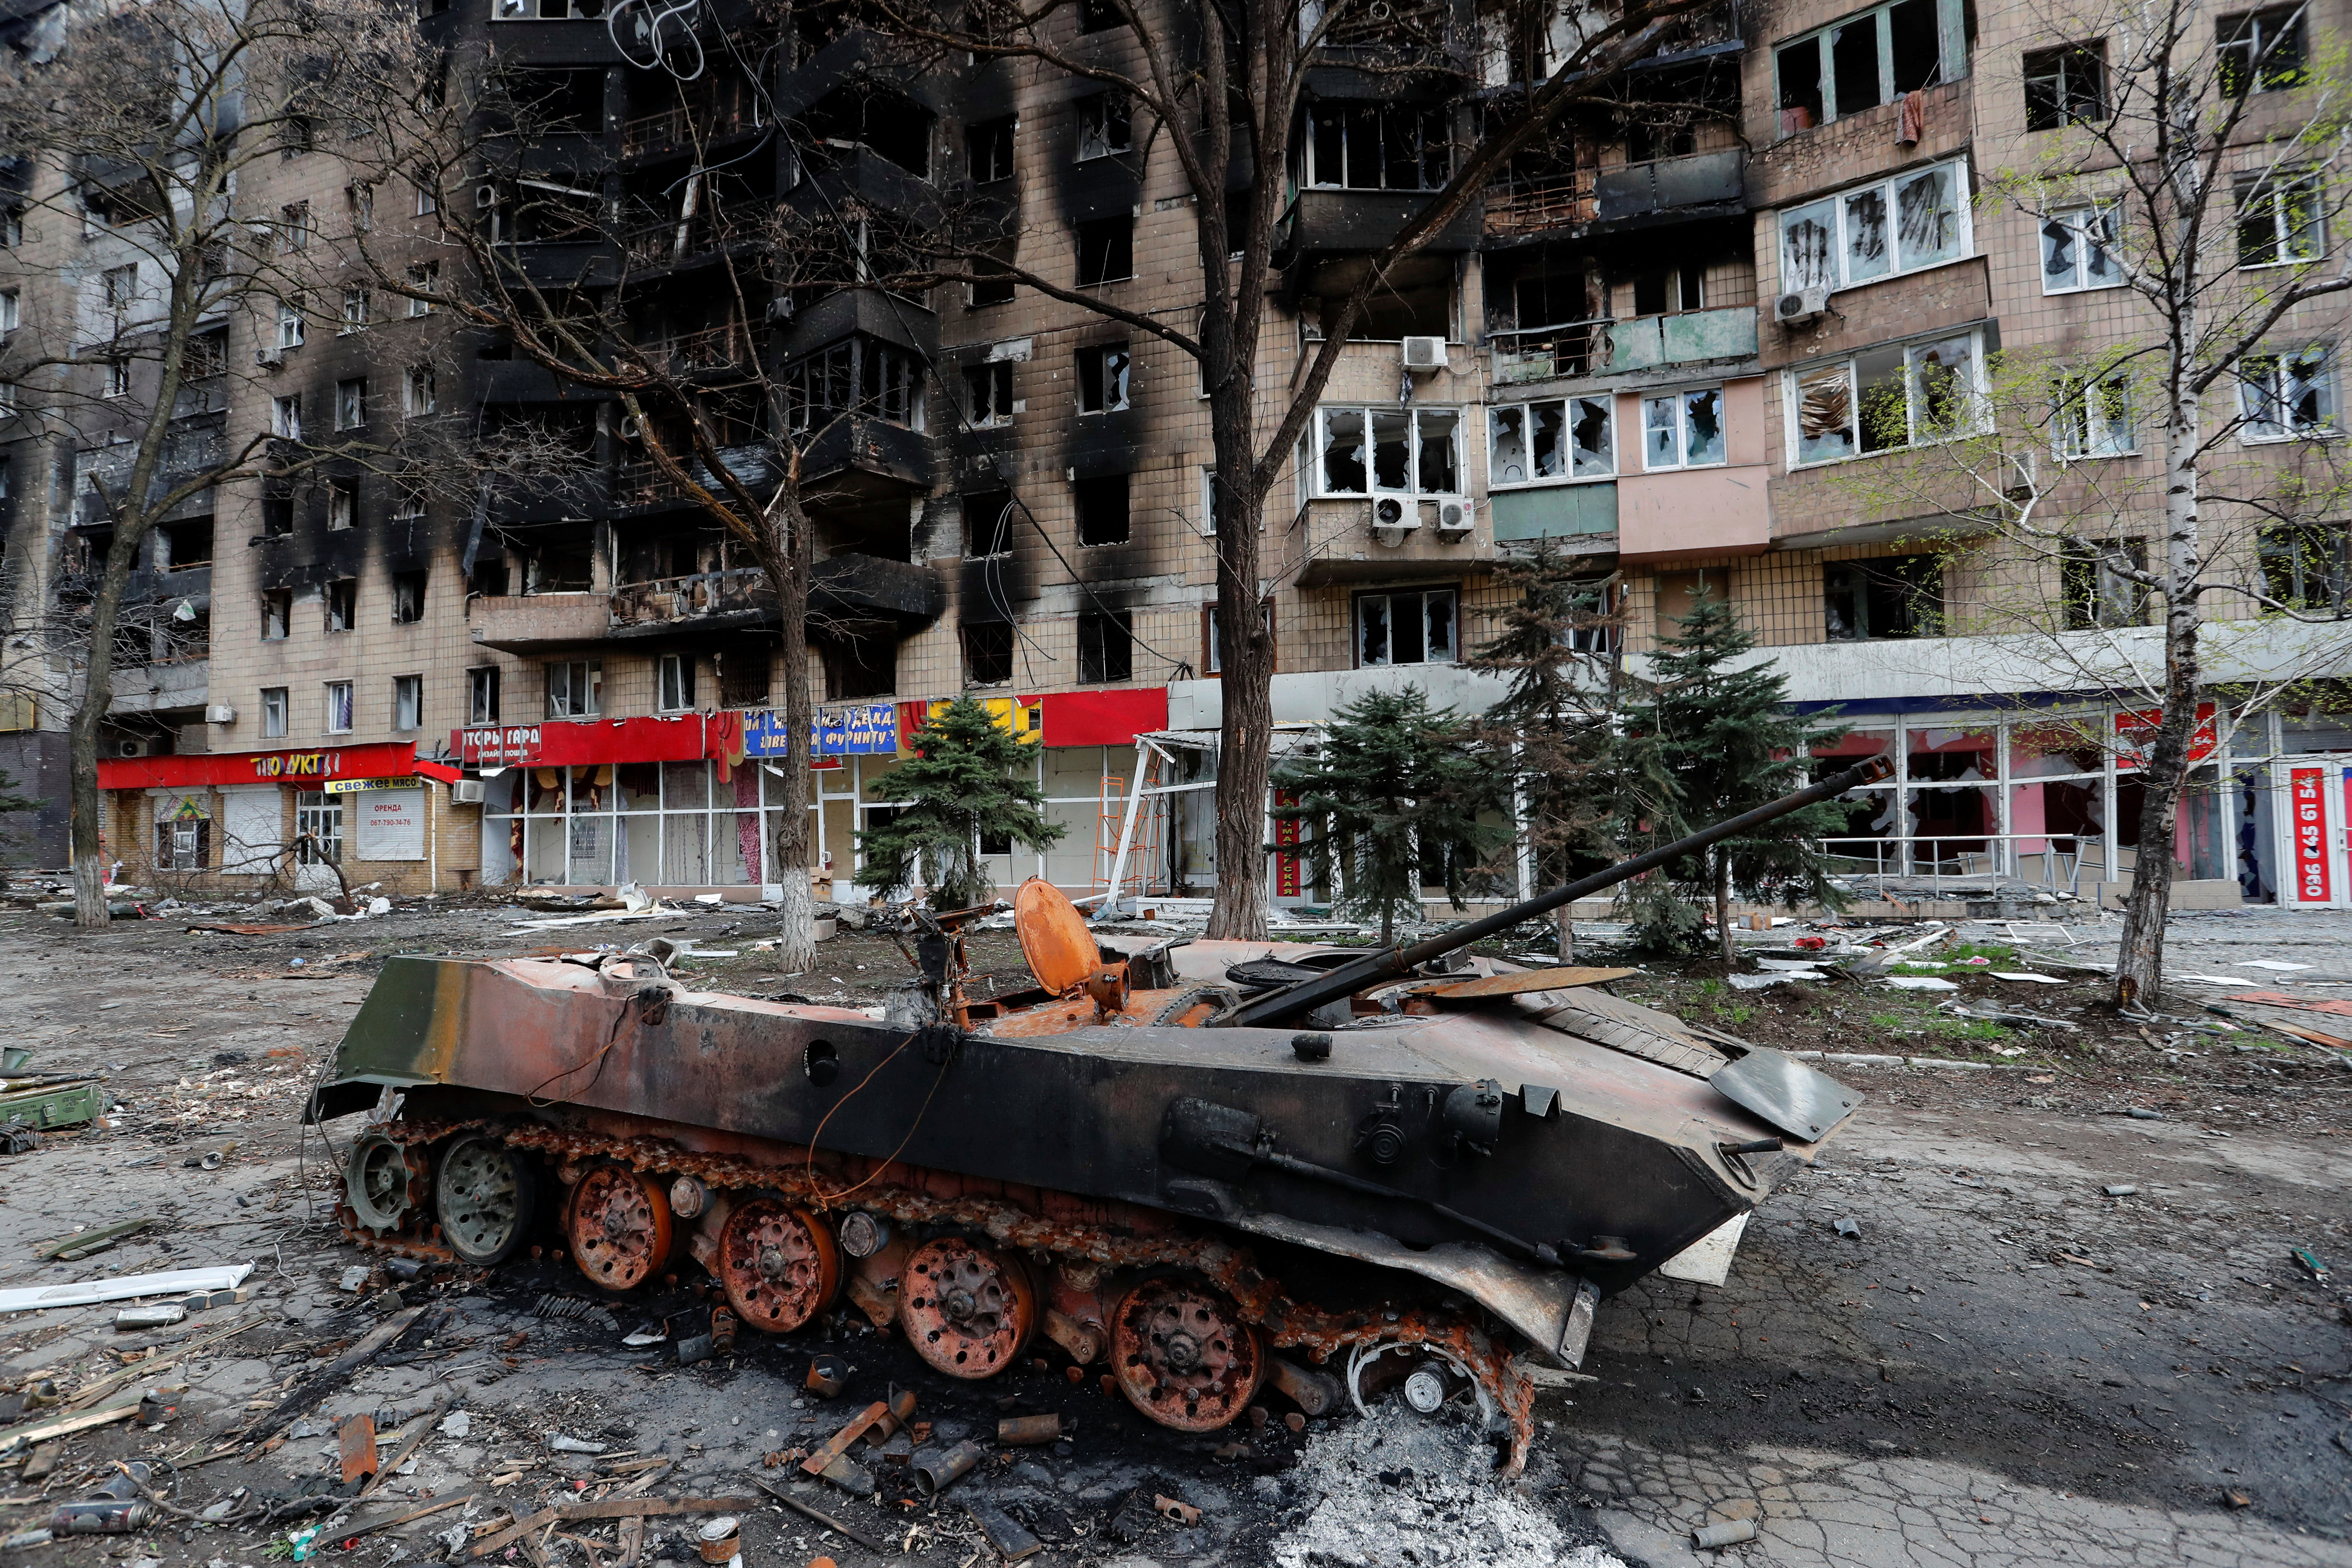 A view shows a destroyed armoured vehicle in Mariupol